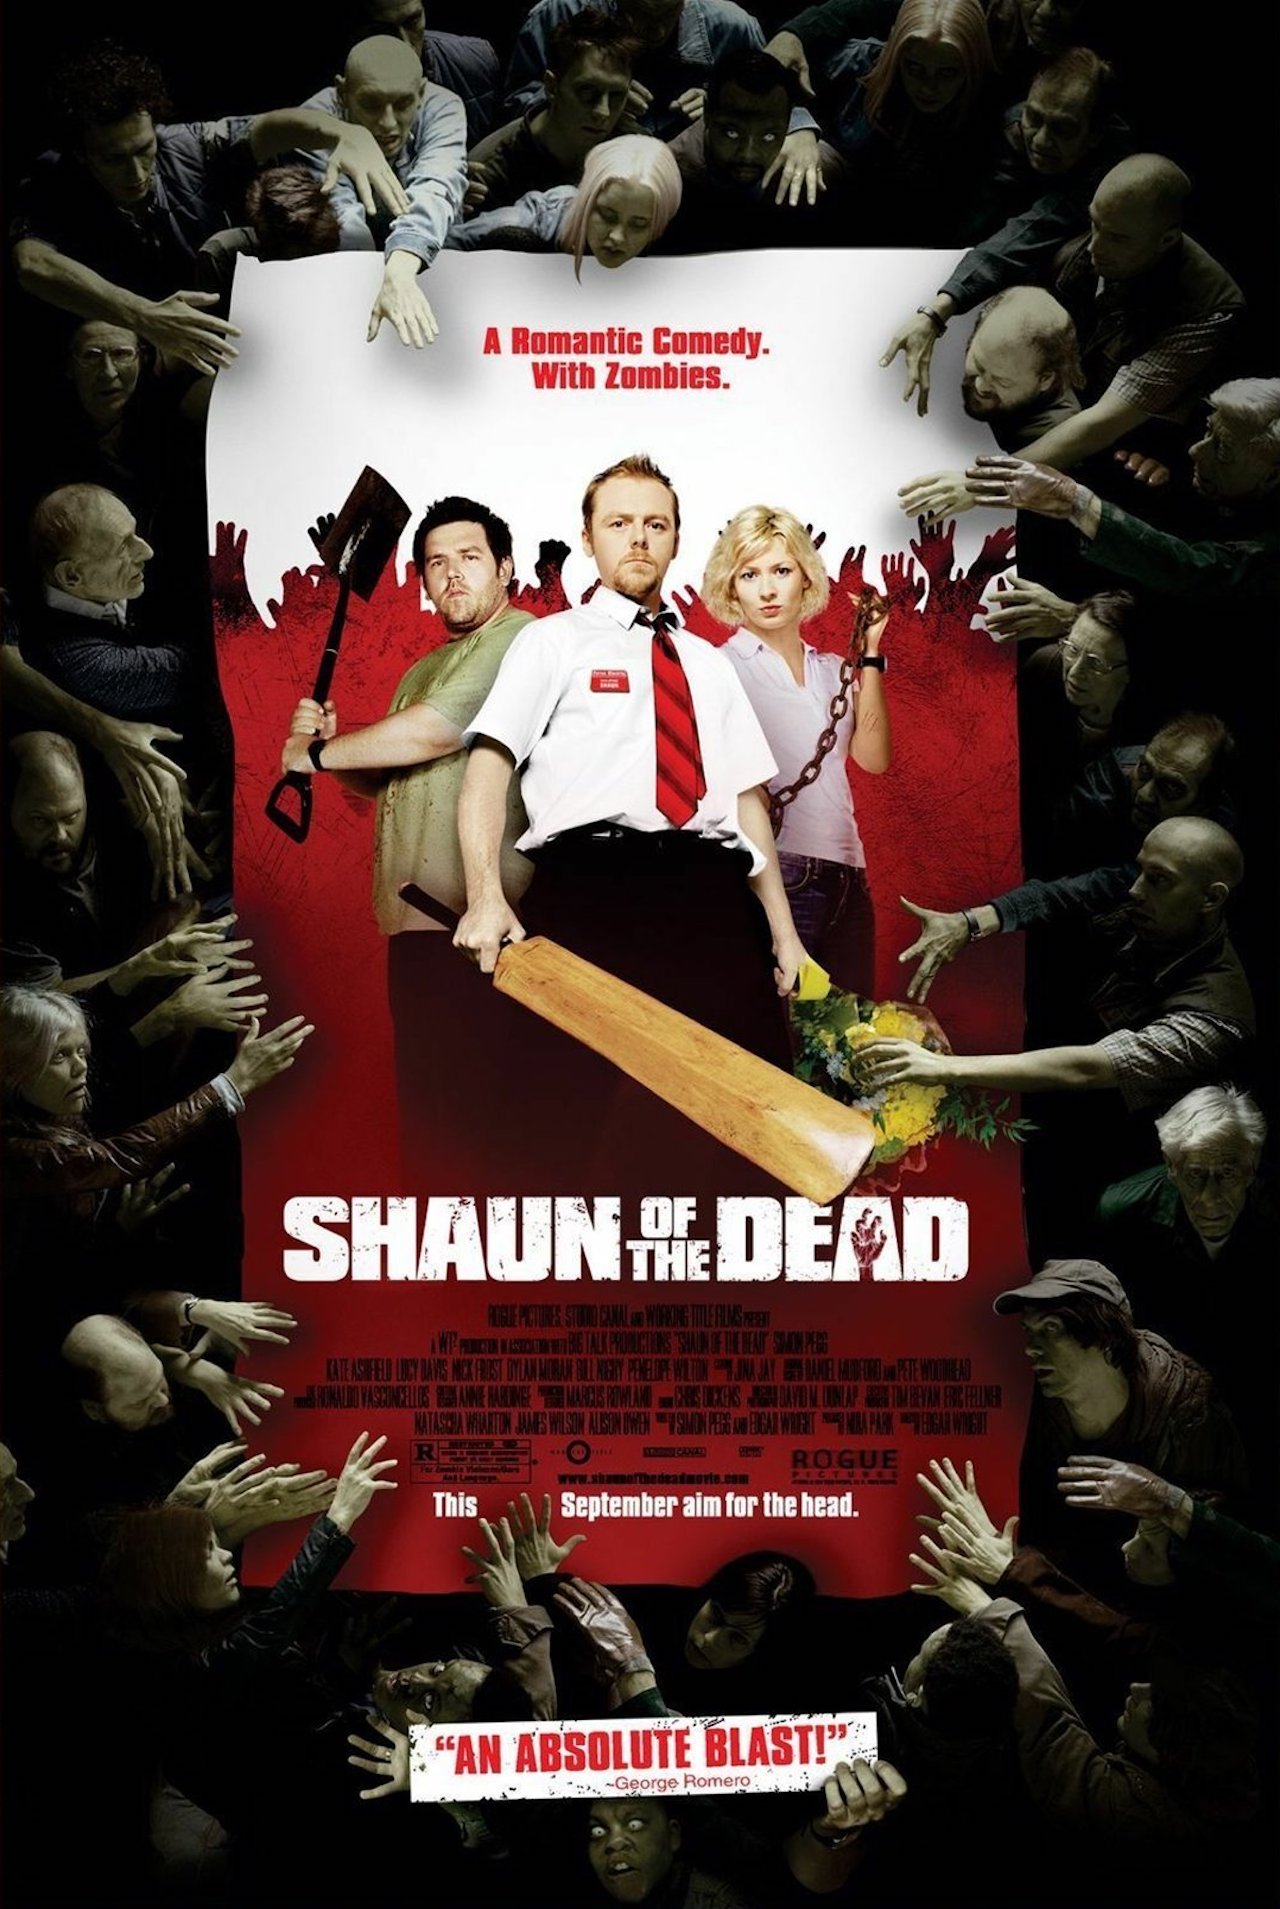 Shaun Of The Dead poster.